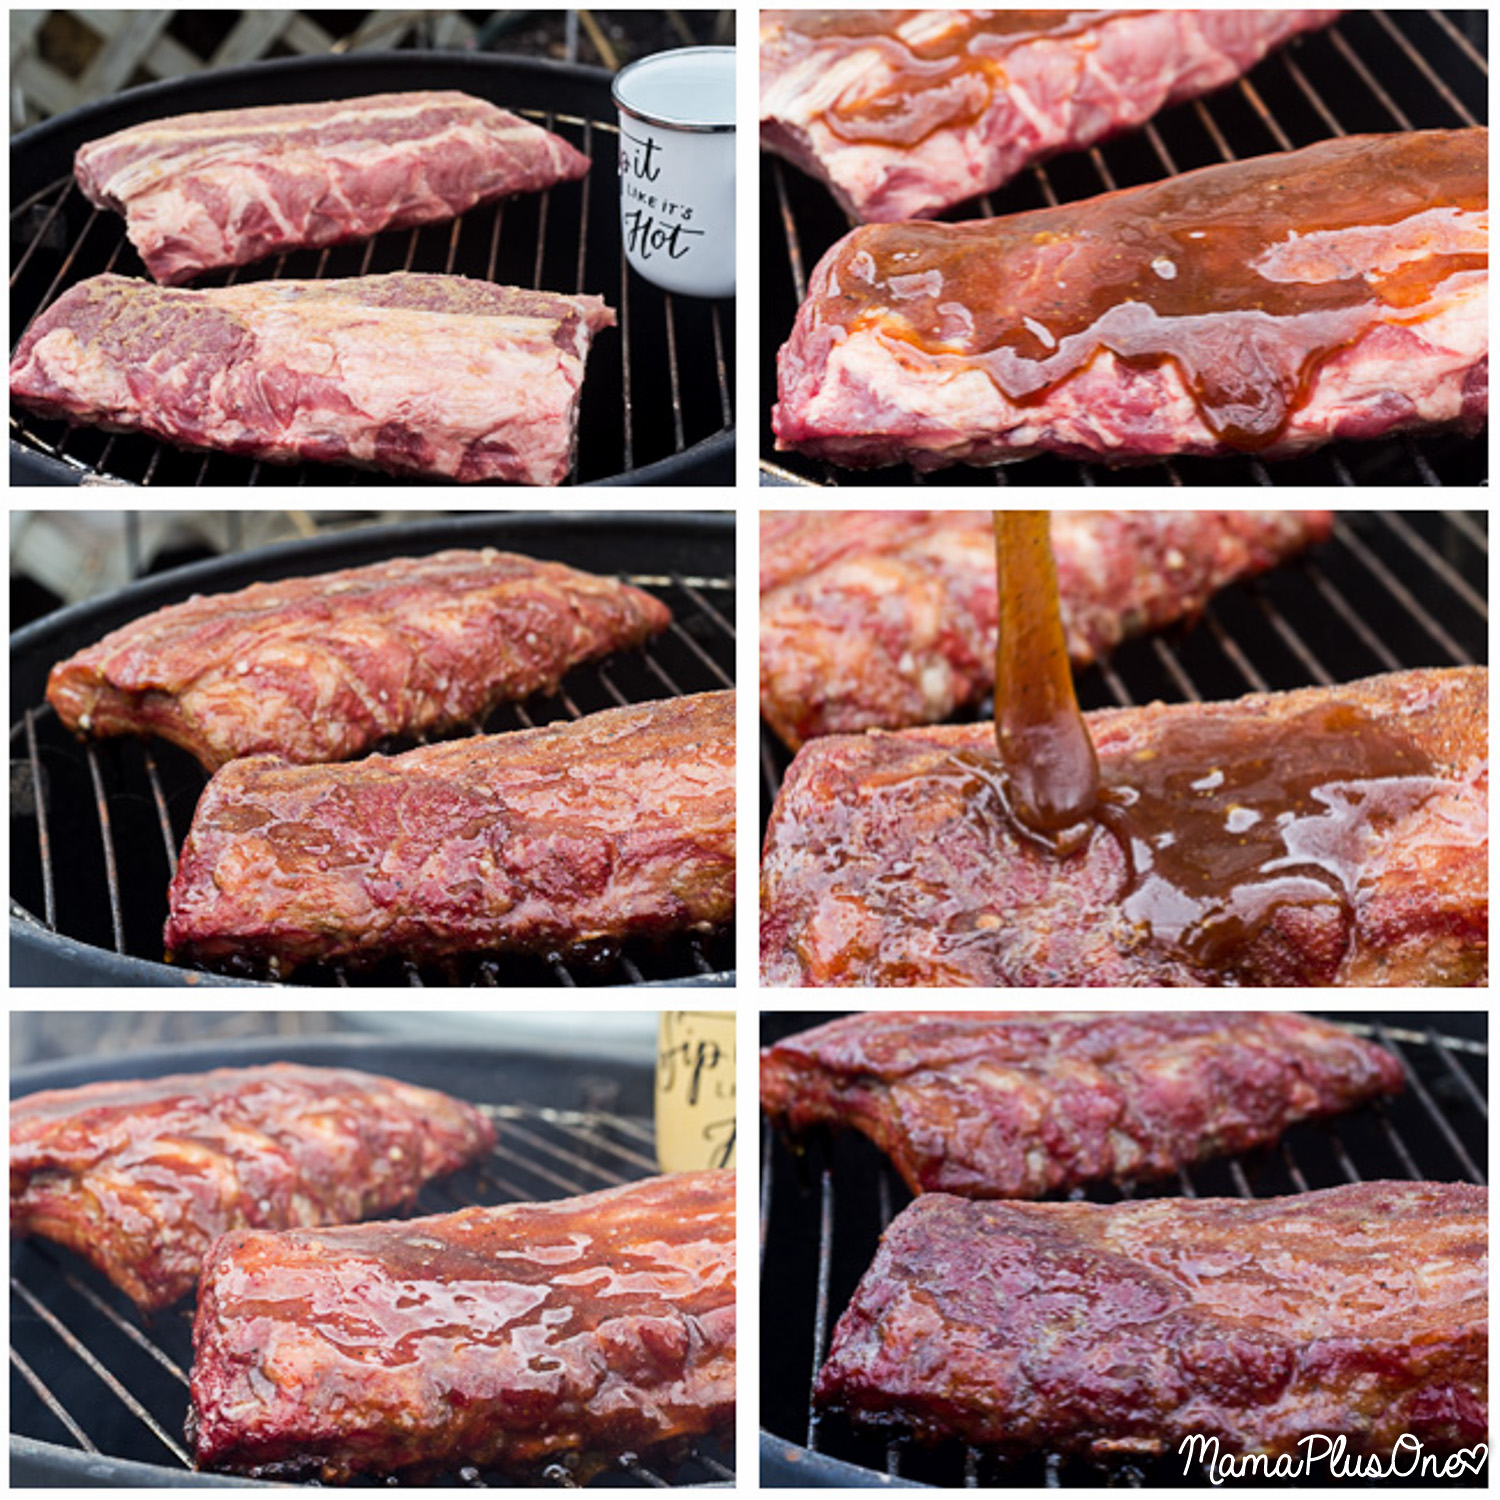 I love that Smithfield Ribs are hand-trimmed, extra-tender, and juicy. The fact that they're hand-trimmed makes life so much easier for me (no trimming on my part!) and that juiciness is just clear from the moment you bite in. Smithfield Ribs have no added hormones or steroids, so you can be confident when making this meat for your family.